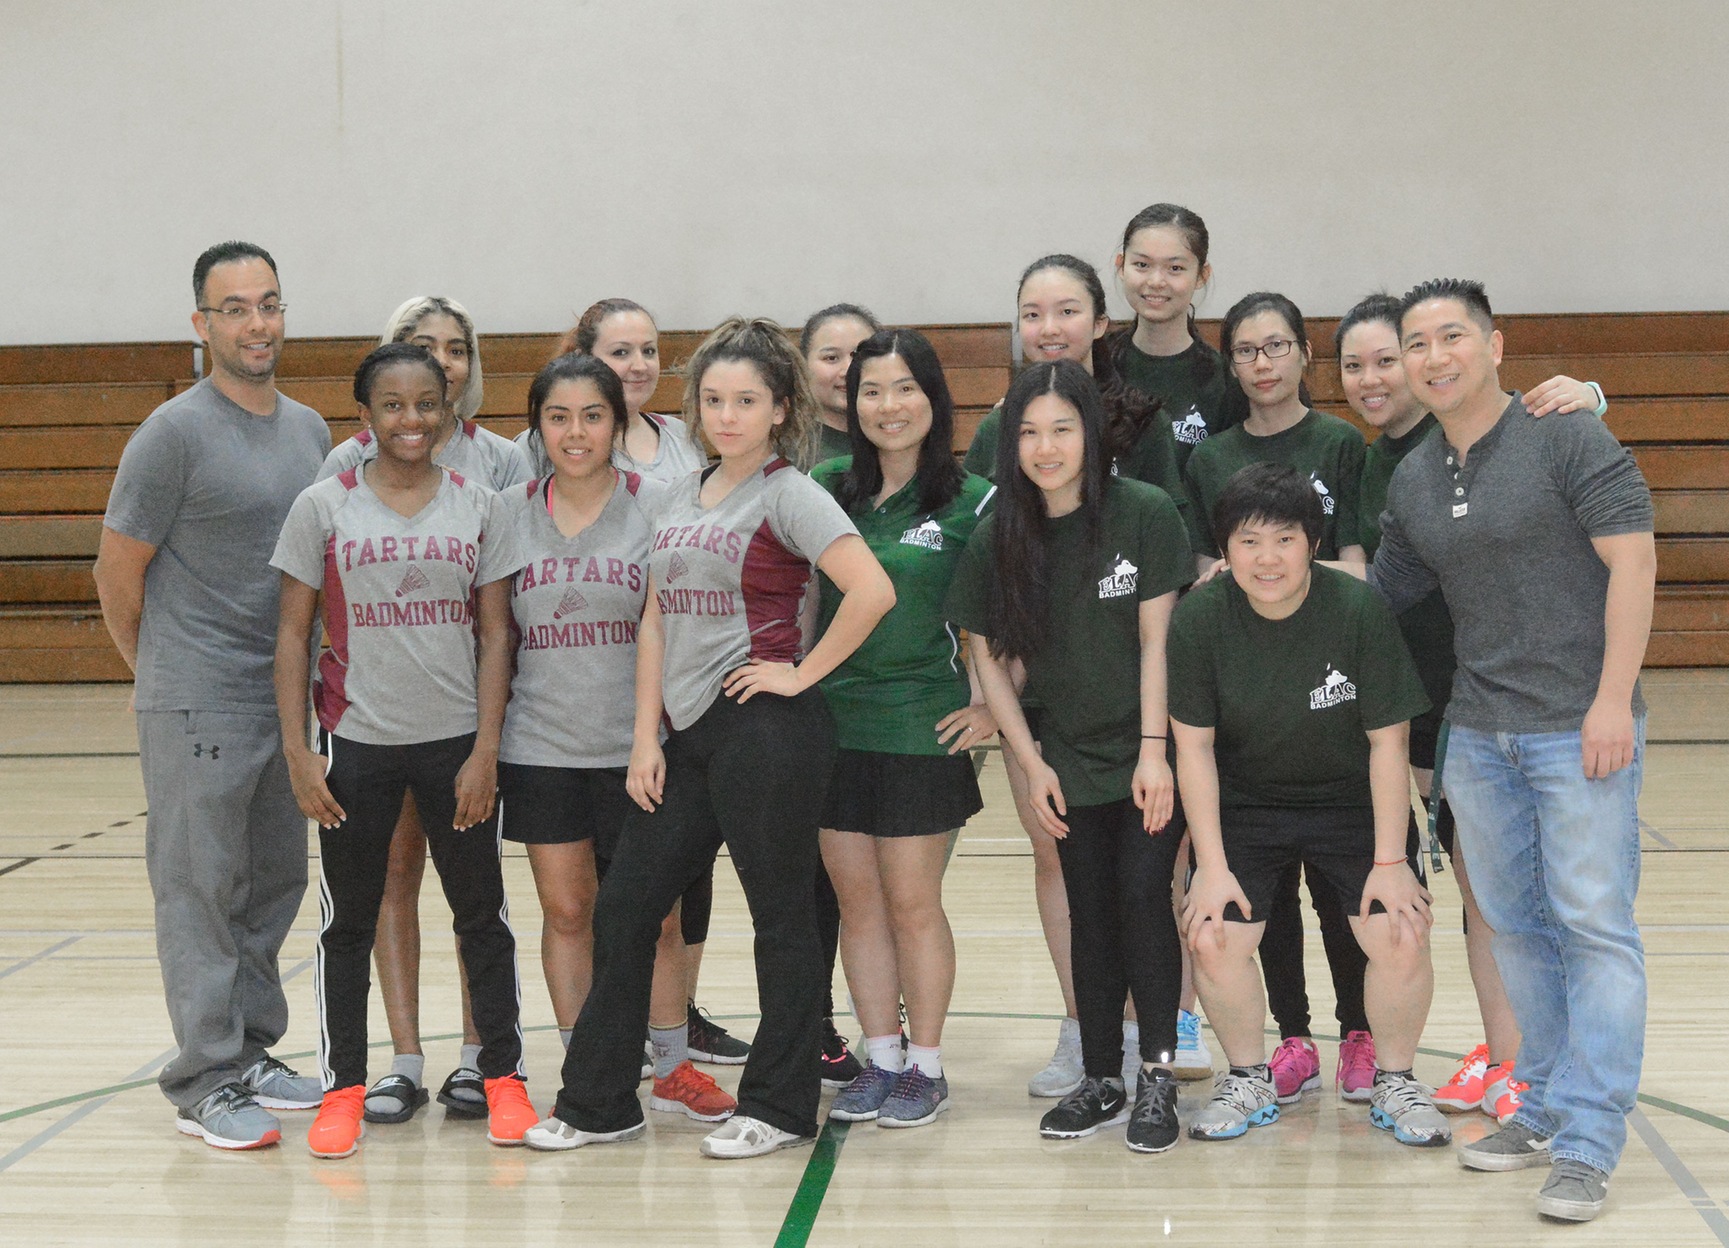 Badminton teams from East Los Angeles College and ECC Compton Center with coaches Qui Nguy and Lena Zeng (both from ELAC) and Tony Diaz (Compton). (Photo by Tadzio Garcia)